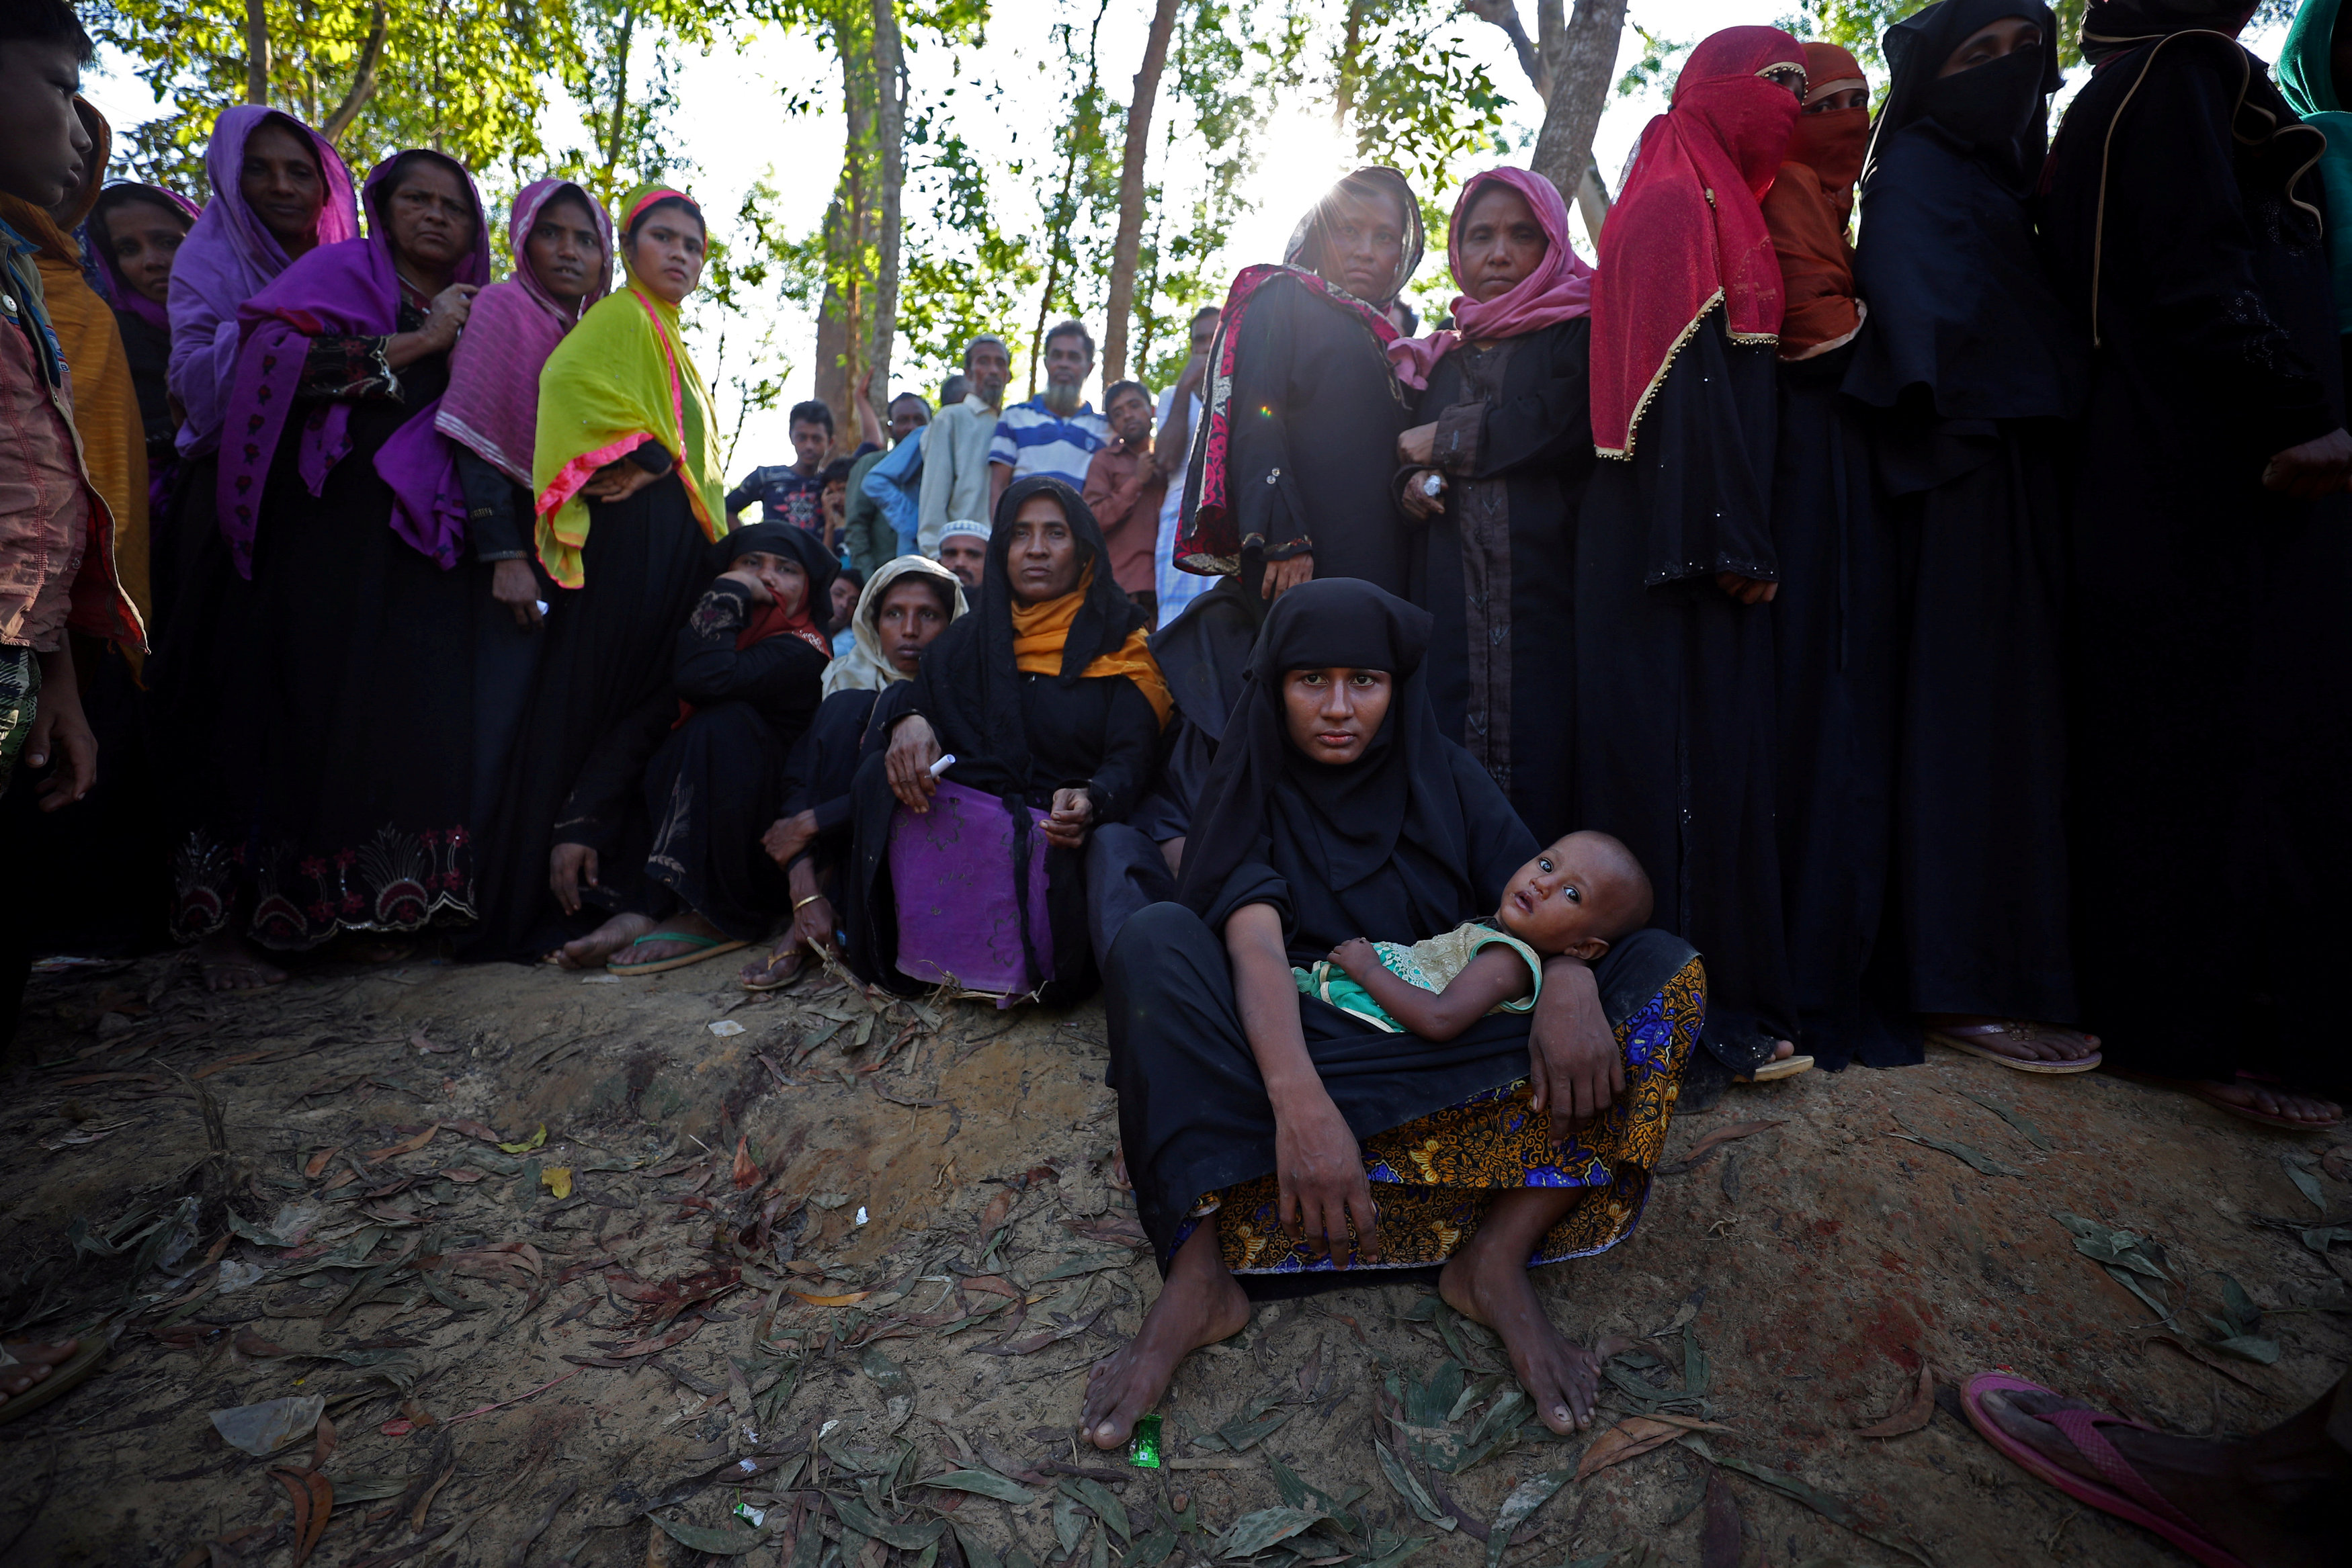 Rohingya refugees arrival 'untenable' as thousands arrive daily, says Bangladesh